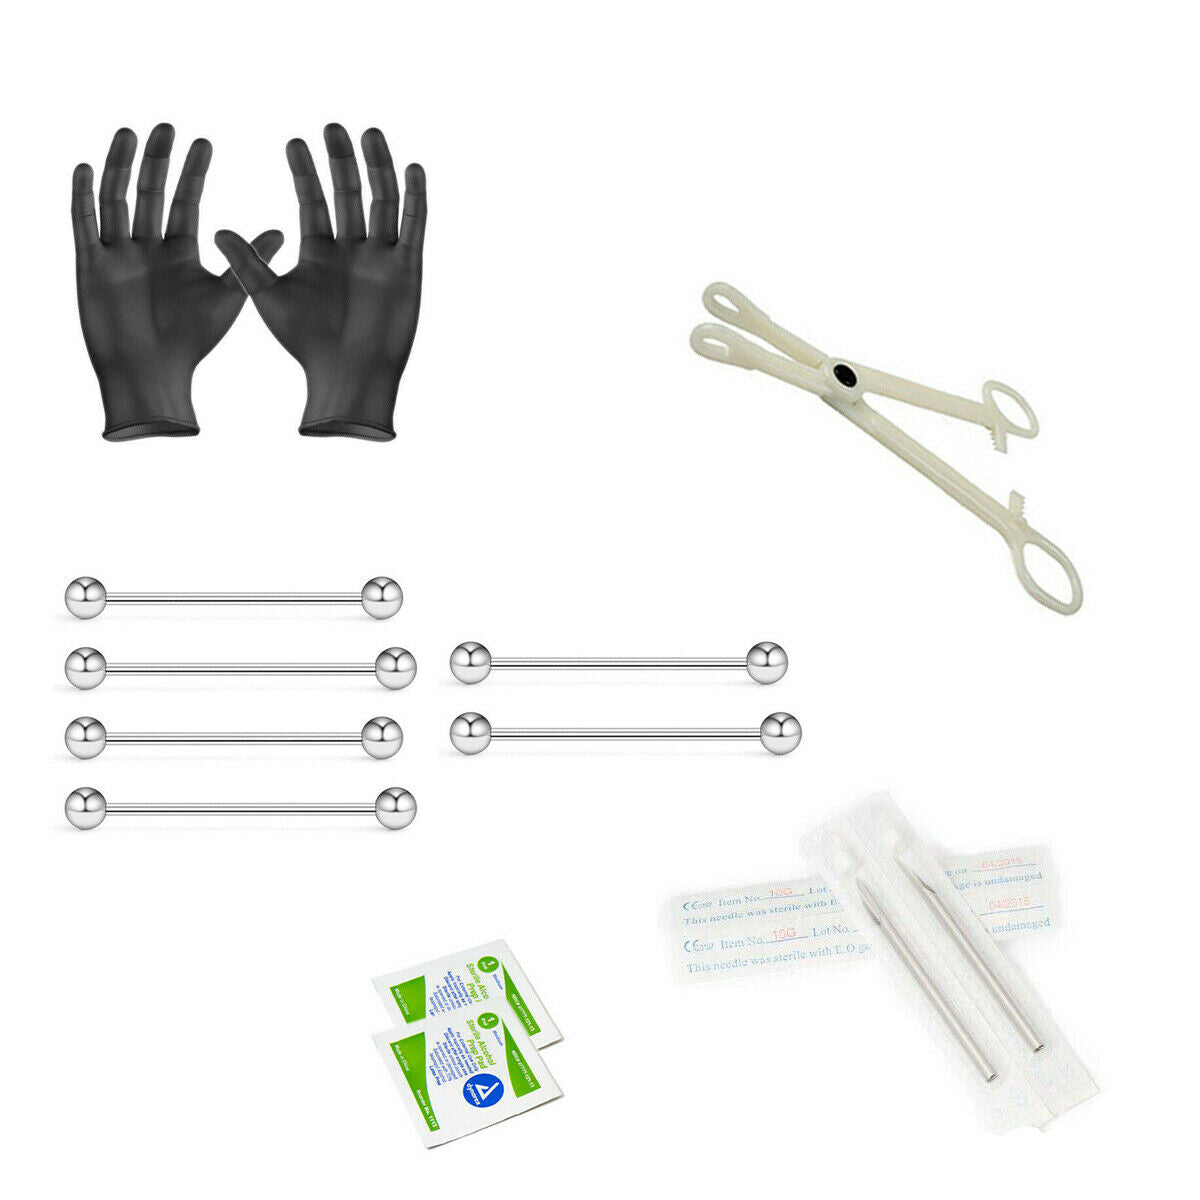 12-Piece Industrial Barbells Piercing Kit - Includes (6) 14g Industrial Barbells, (2) Needles, (1) Forceps, (2) Alcohol Wipes and a Pair of Gloves